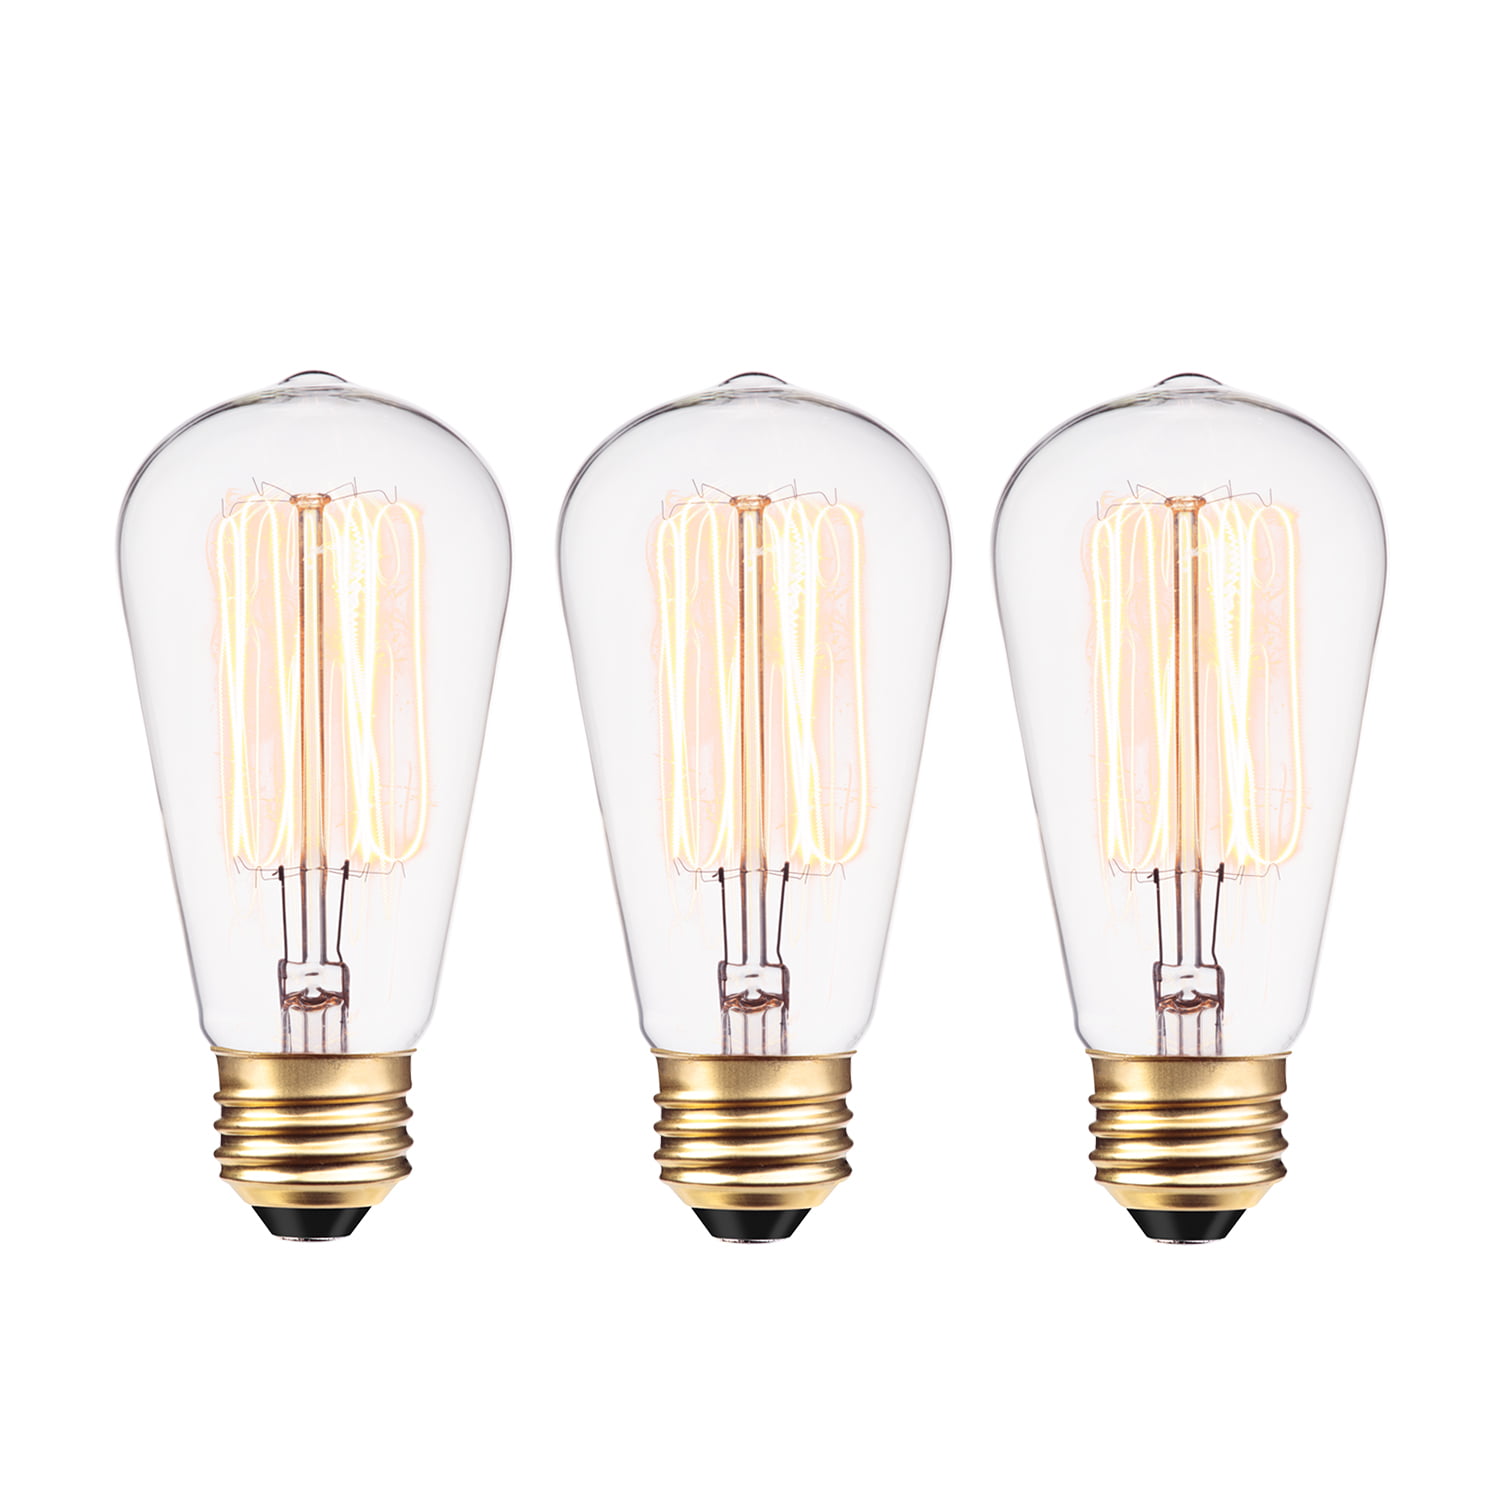 110~130 Volts 6 Pack E26 Base 70 Lumens H&PC-73222 Rolay 25 Watt Vintage Edison Light Bulb with Squirrel Cage Filament 